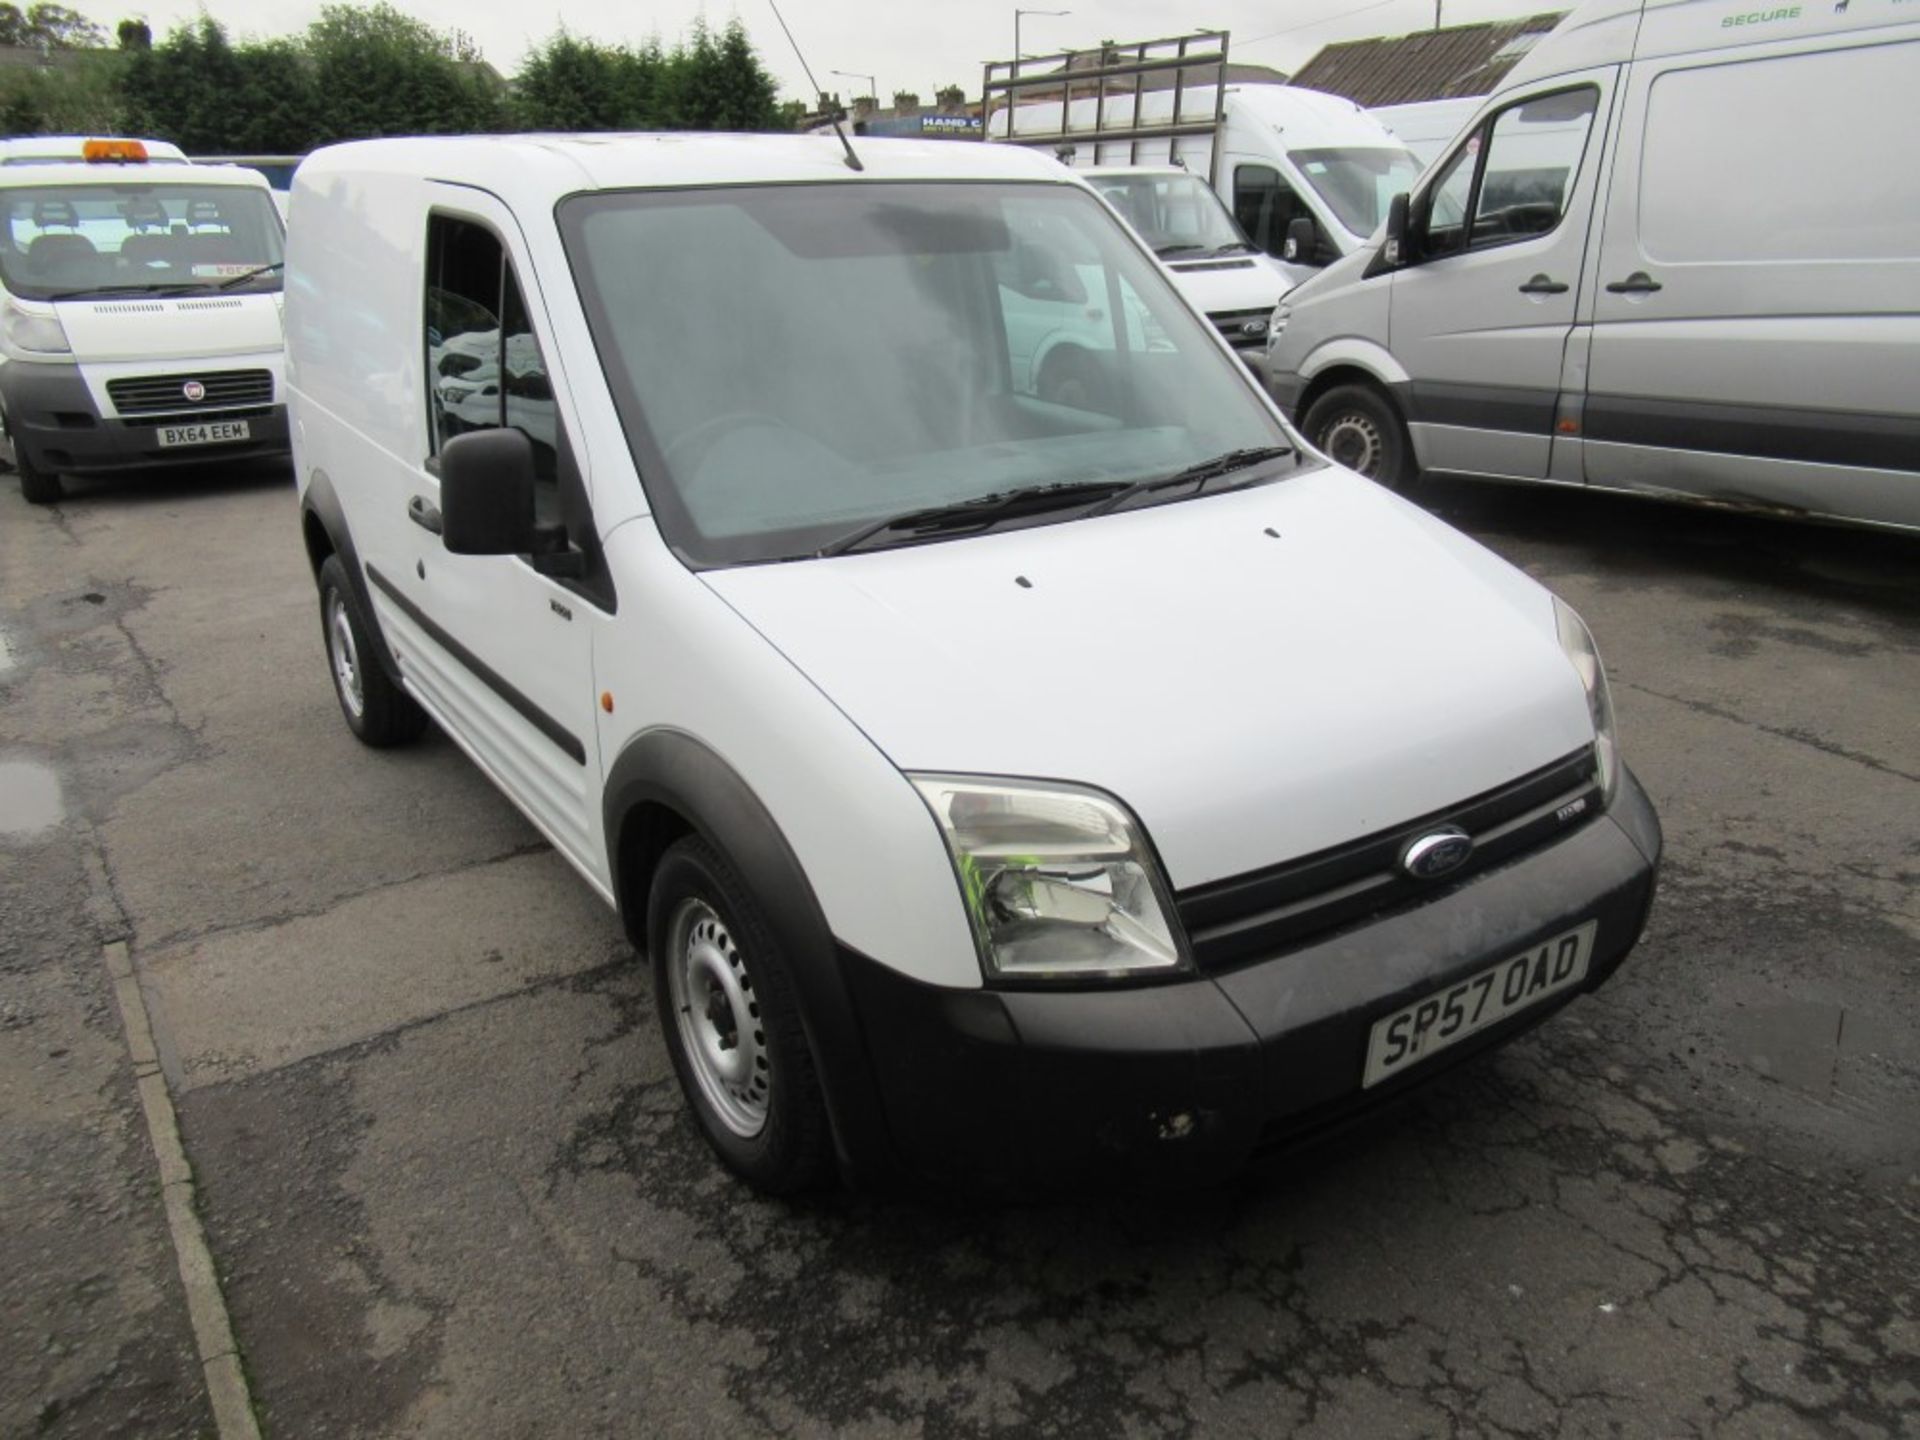 57 reg FORD TRANSIT CONNECT T200 L75, 1ST REG 09/07, 73553M NOT WARRANTED, V5 HERE, 2 FORMER KEEPERS